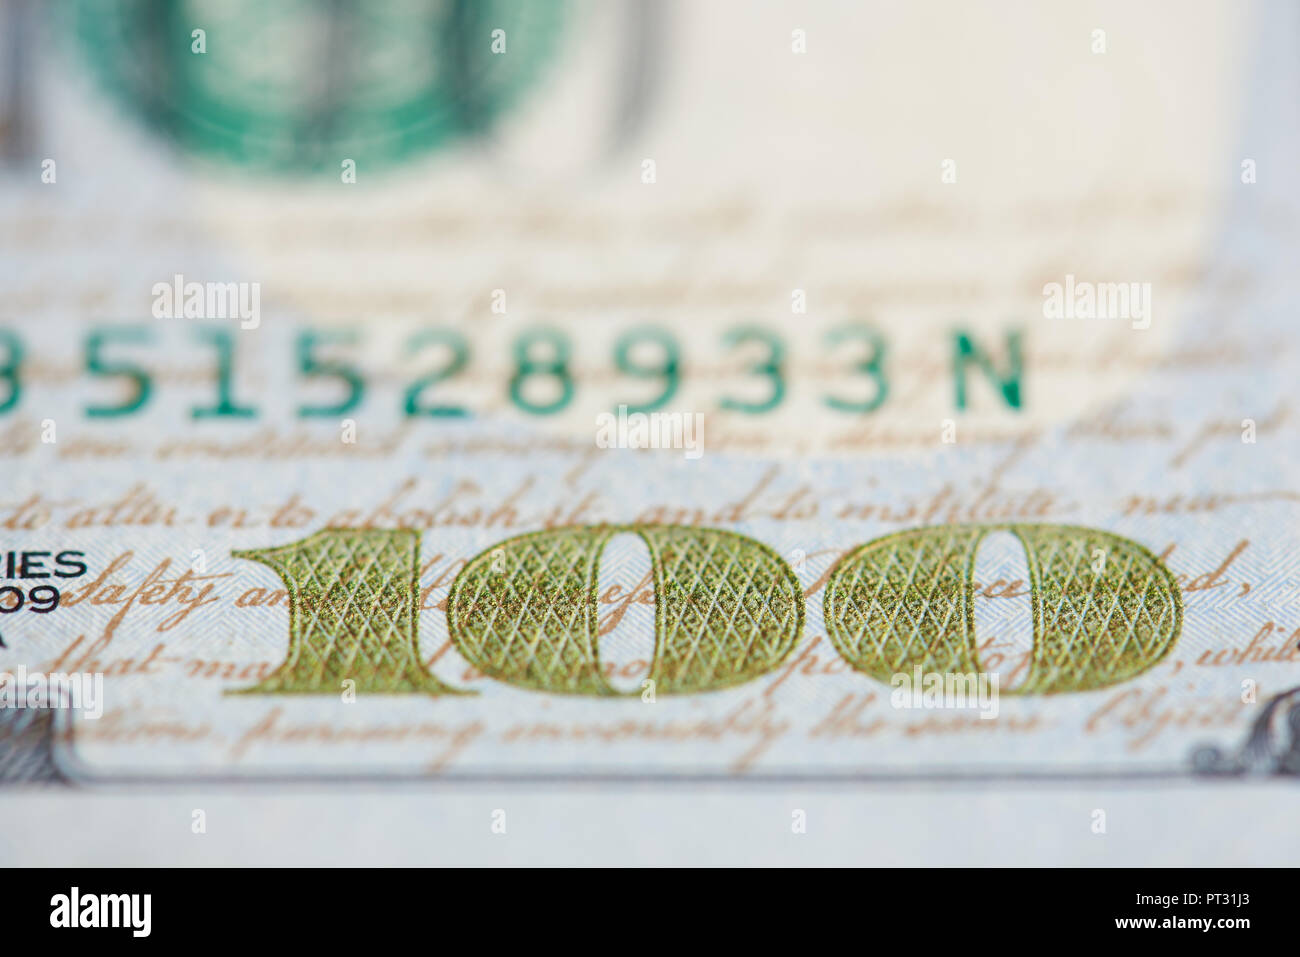 Gold 100 number on dollar bill close up view Stock Photo